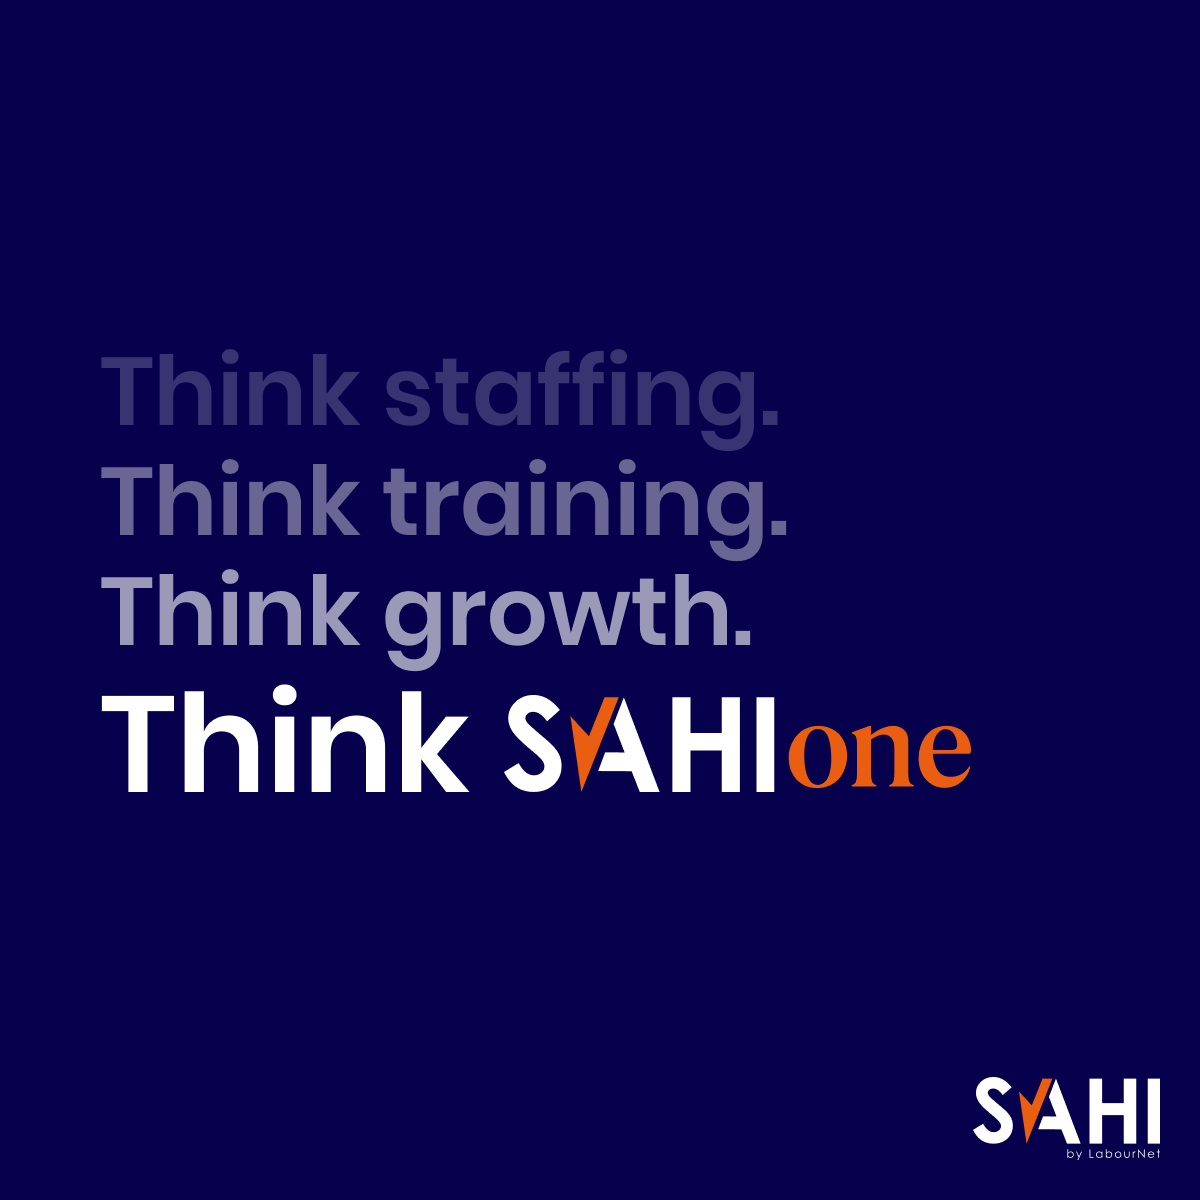 Streamline your workforce management with SAHIone. Our platform covers all stages: from sourcing to training, managing, and engaging. Contact us to learn more. 

#SAHIone #OneStopSolution #TempStaffing #ContractStaffing